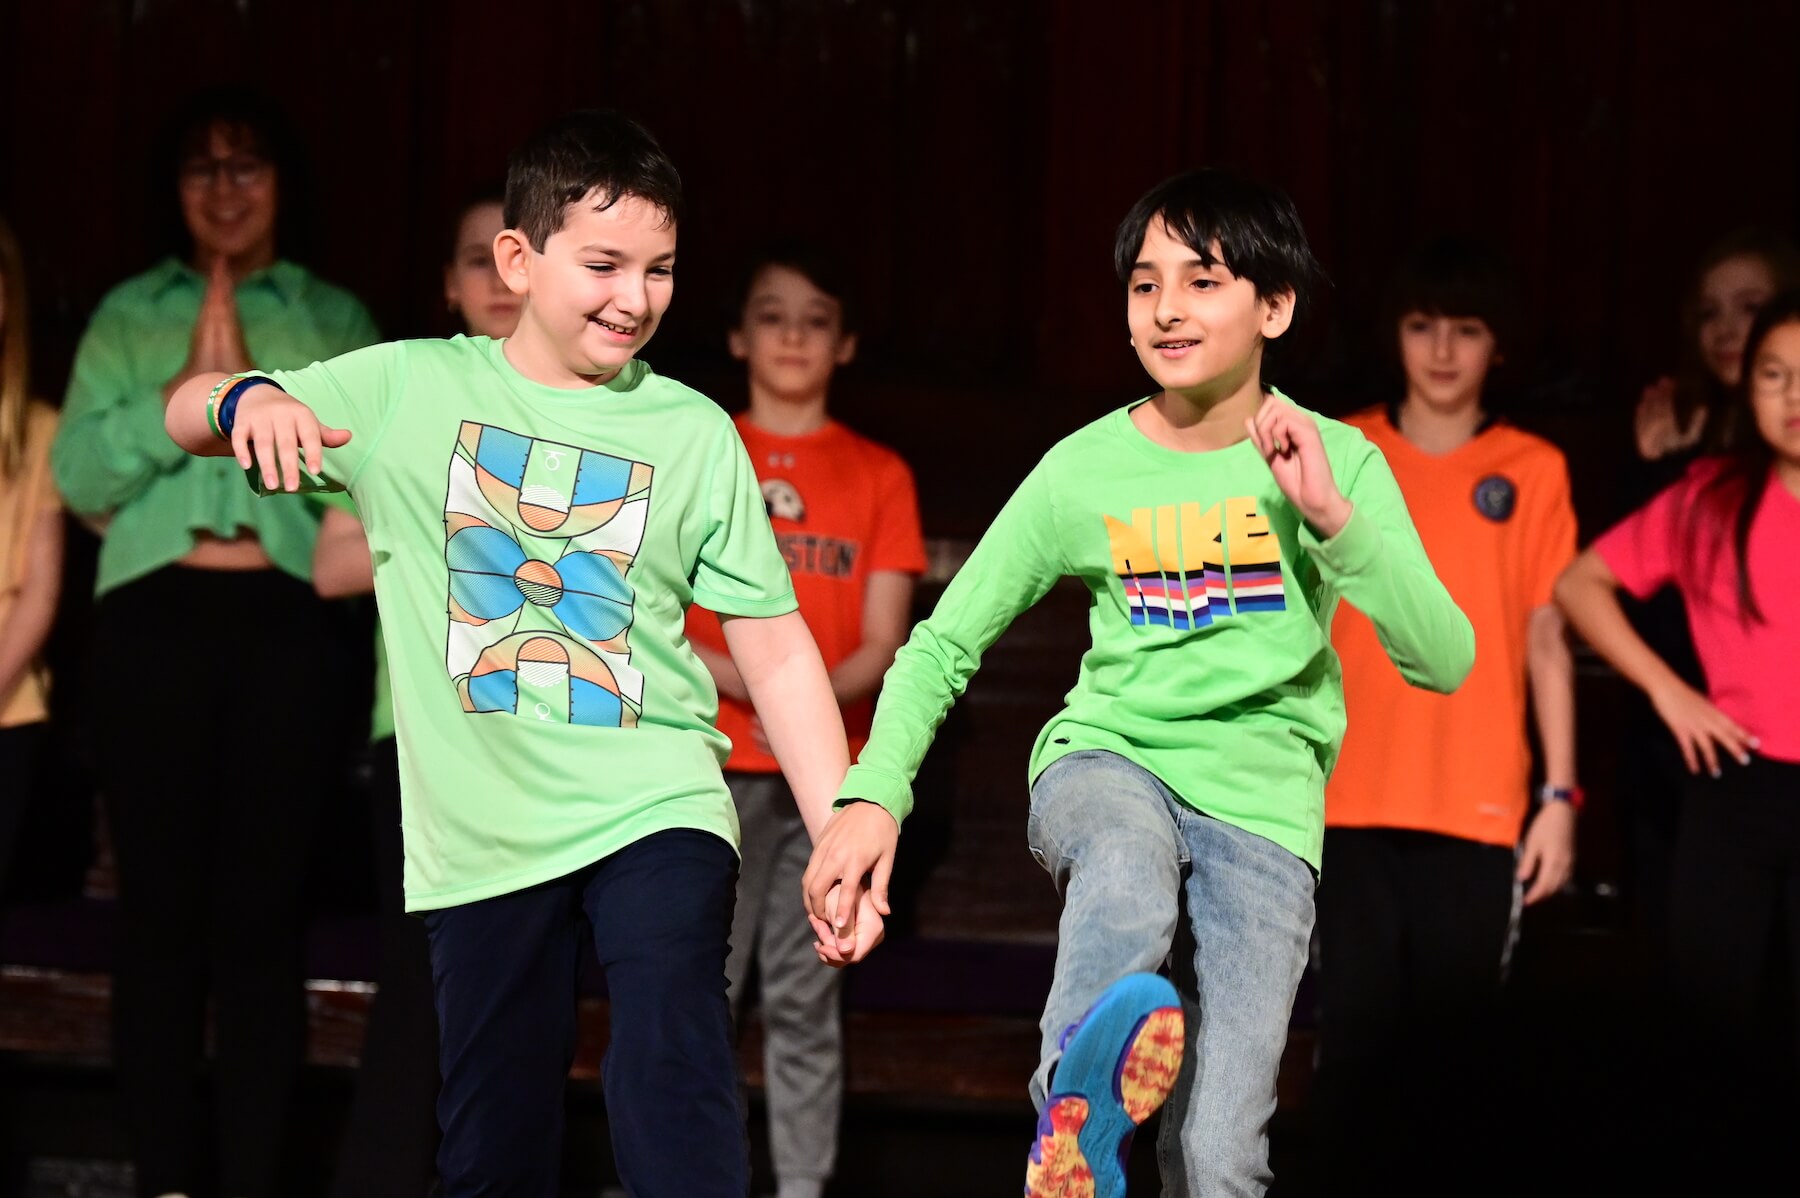 Ethical Culture Fieldston School Fieldston two Ethical Culture students dance together on stage